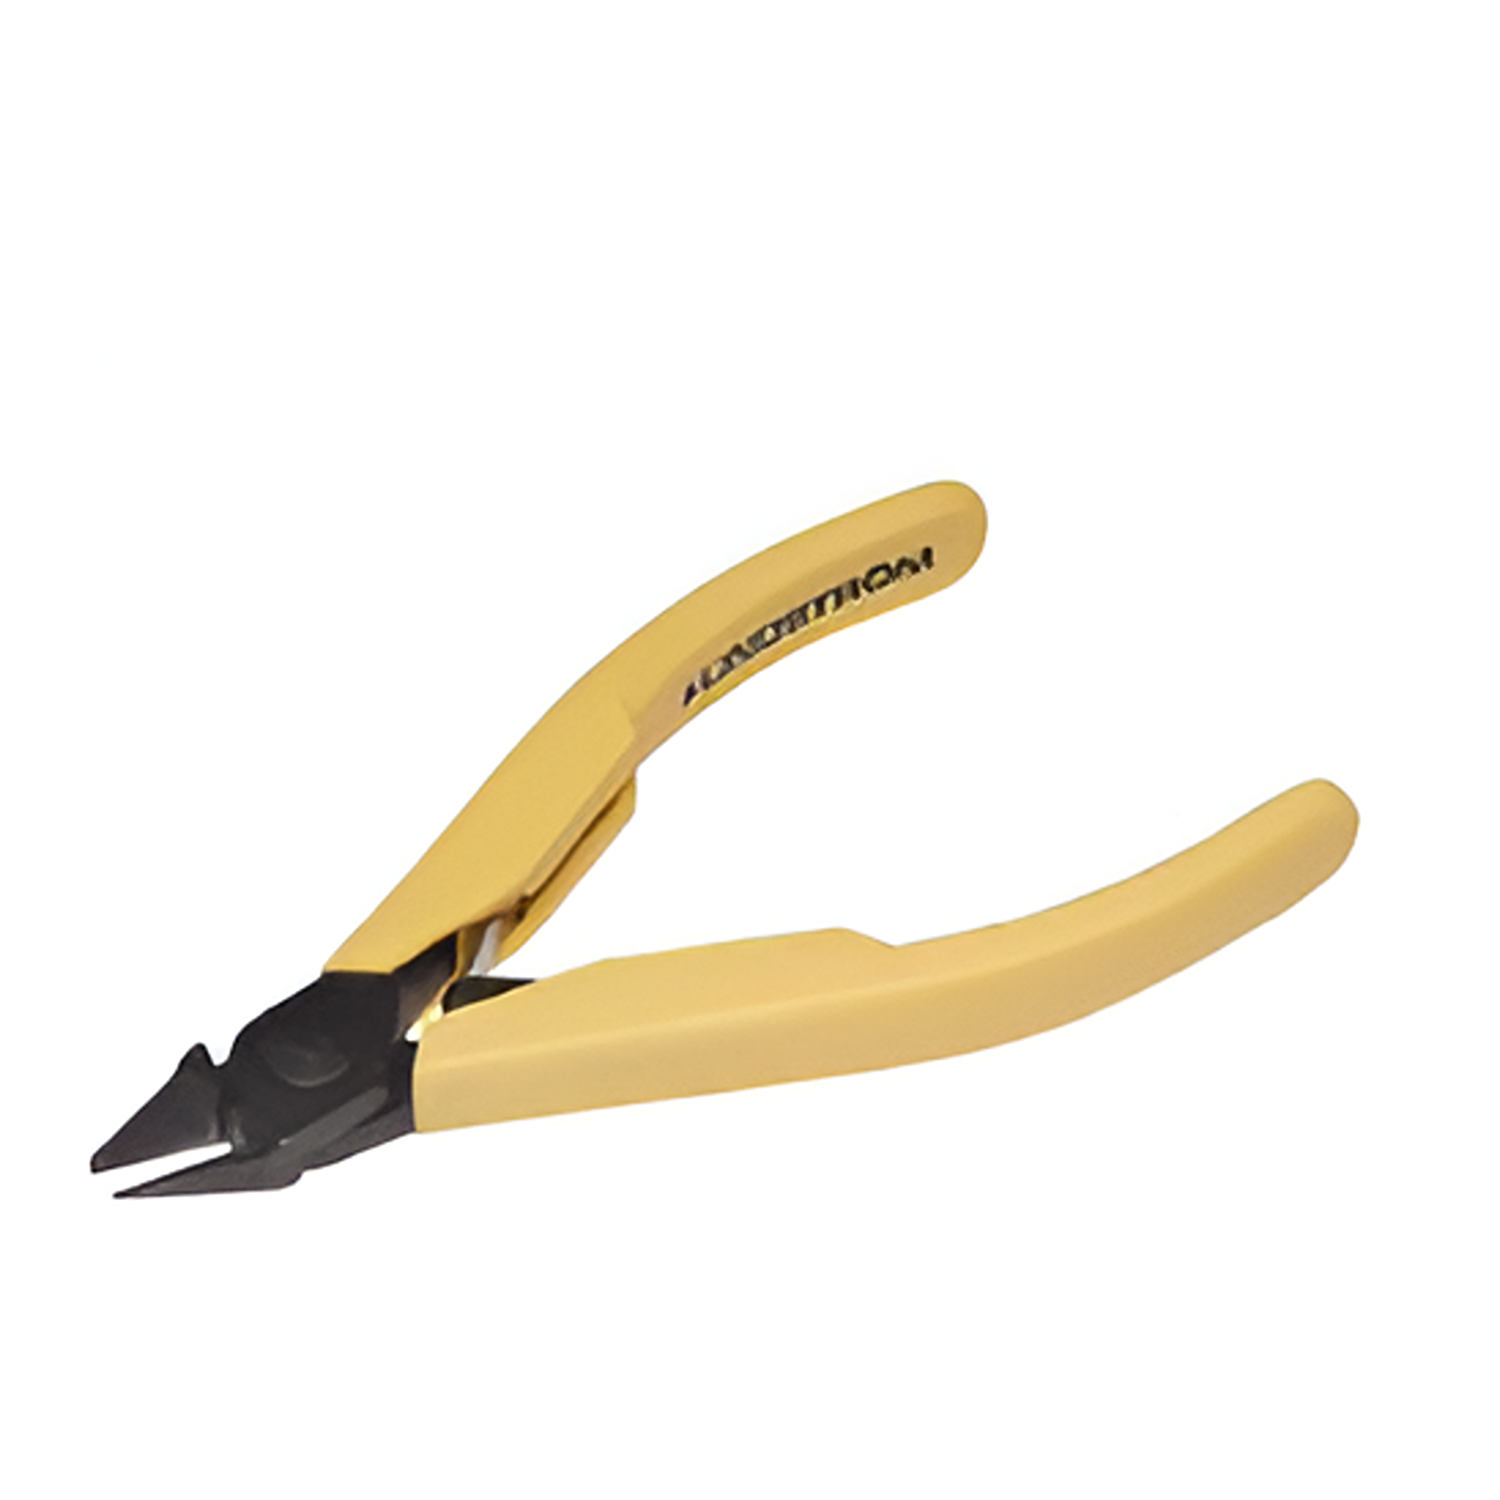 BAHCO 8136-8168 Precision Diagonal Cutter with ESD Safe Handle - Premium Diagonal Cutter from BAHCO - Shop now at Yew Aik.